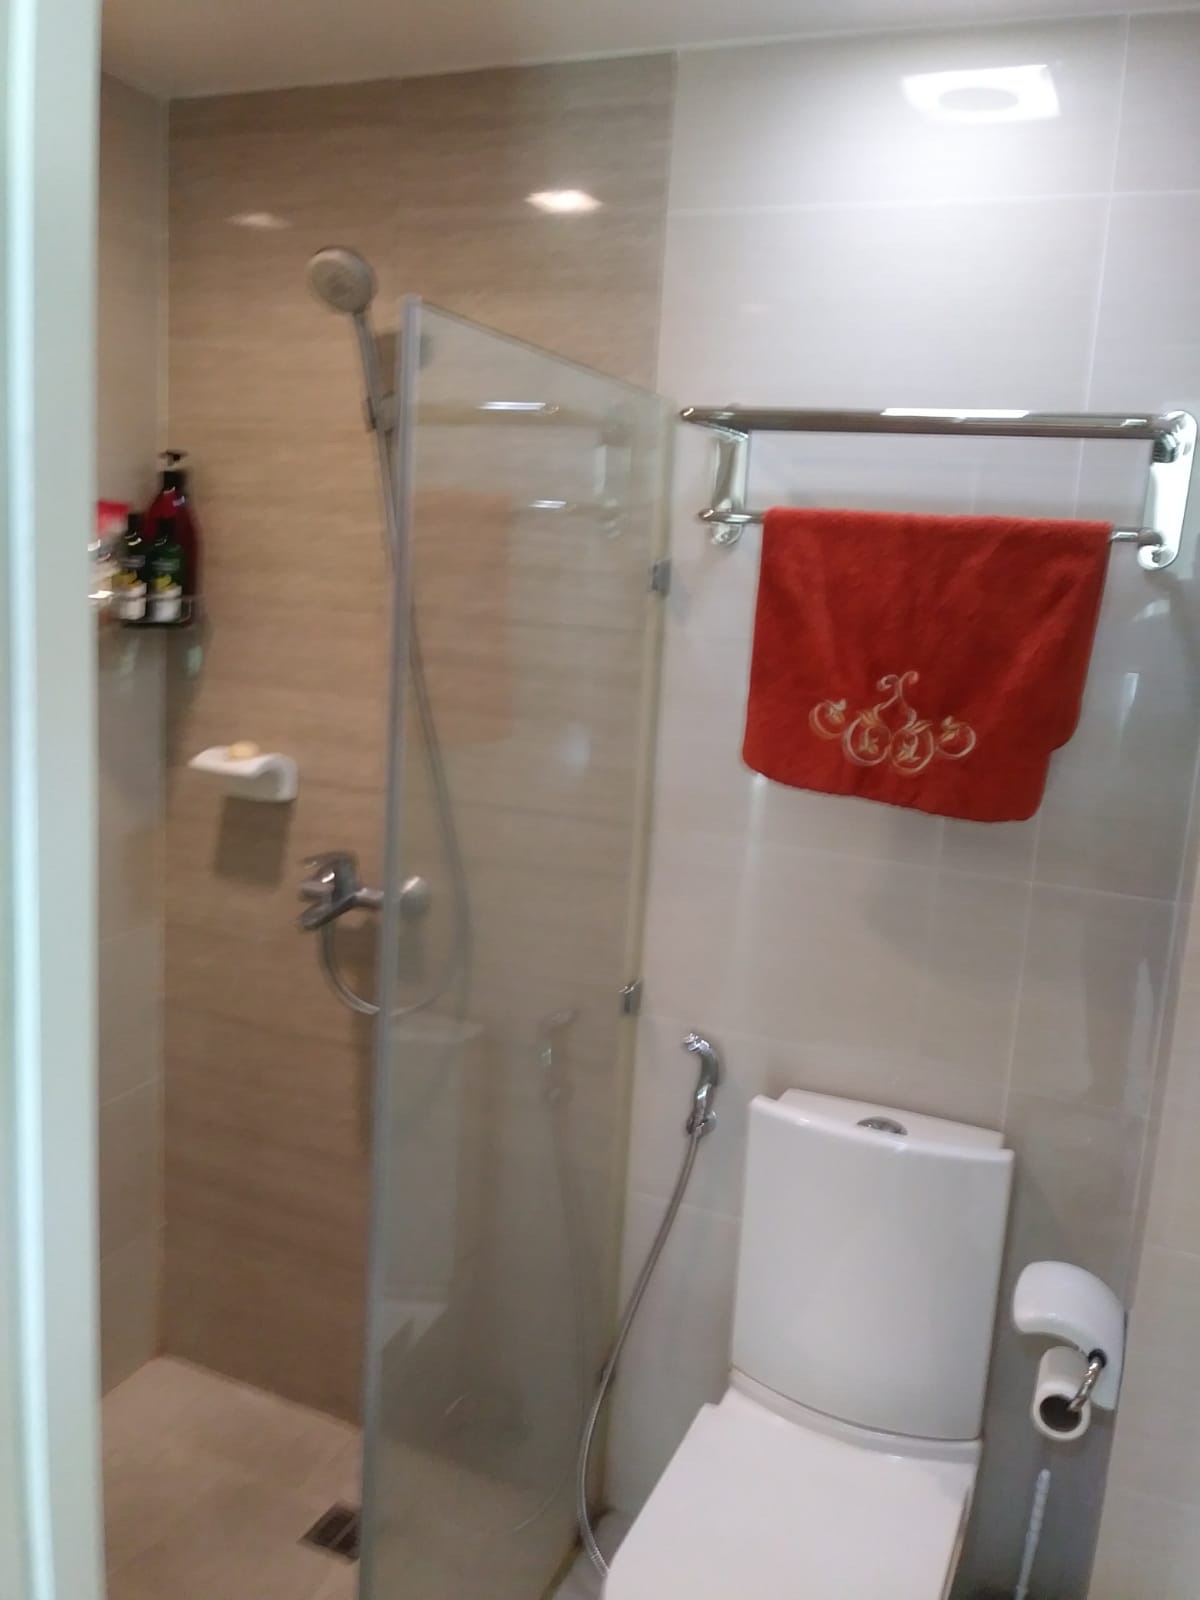 1 Bedroom Condo For Sale at 8 Forbestown Road, BGC, Taguig City 9